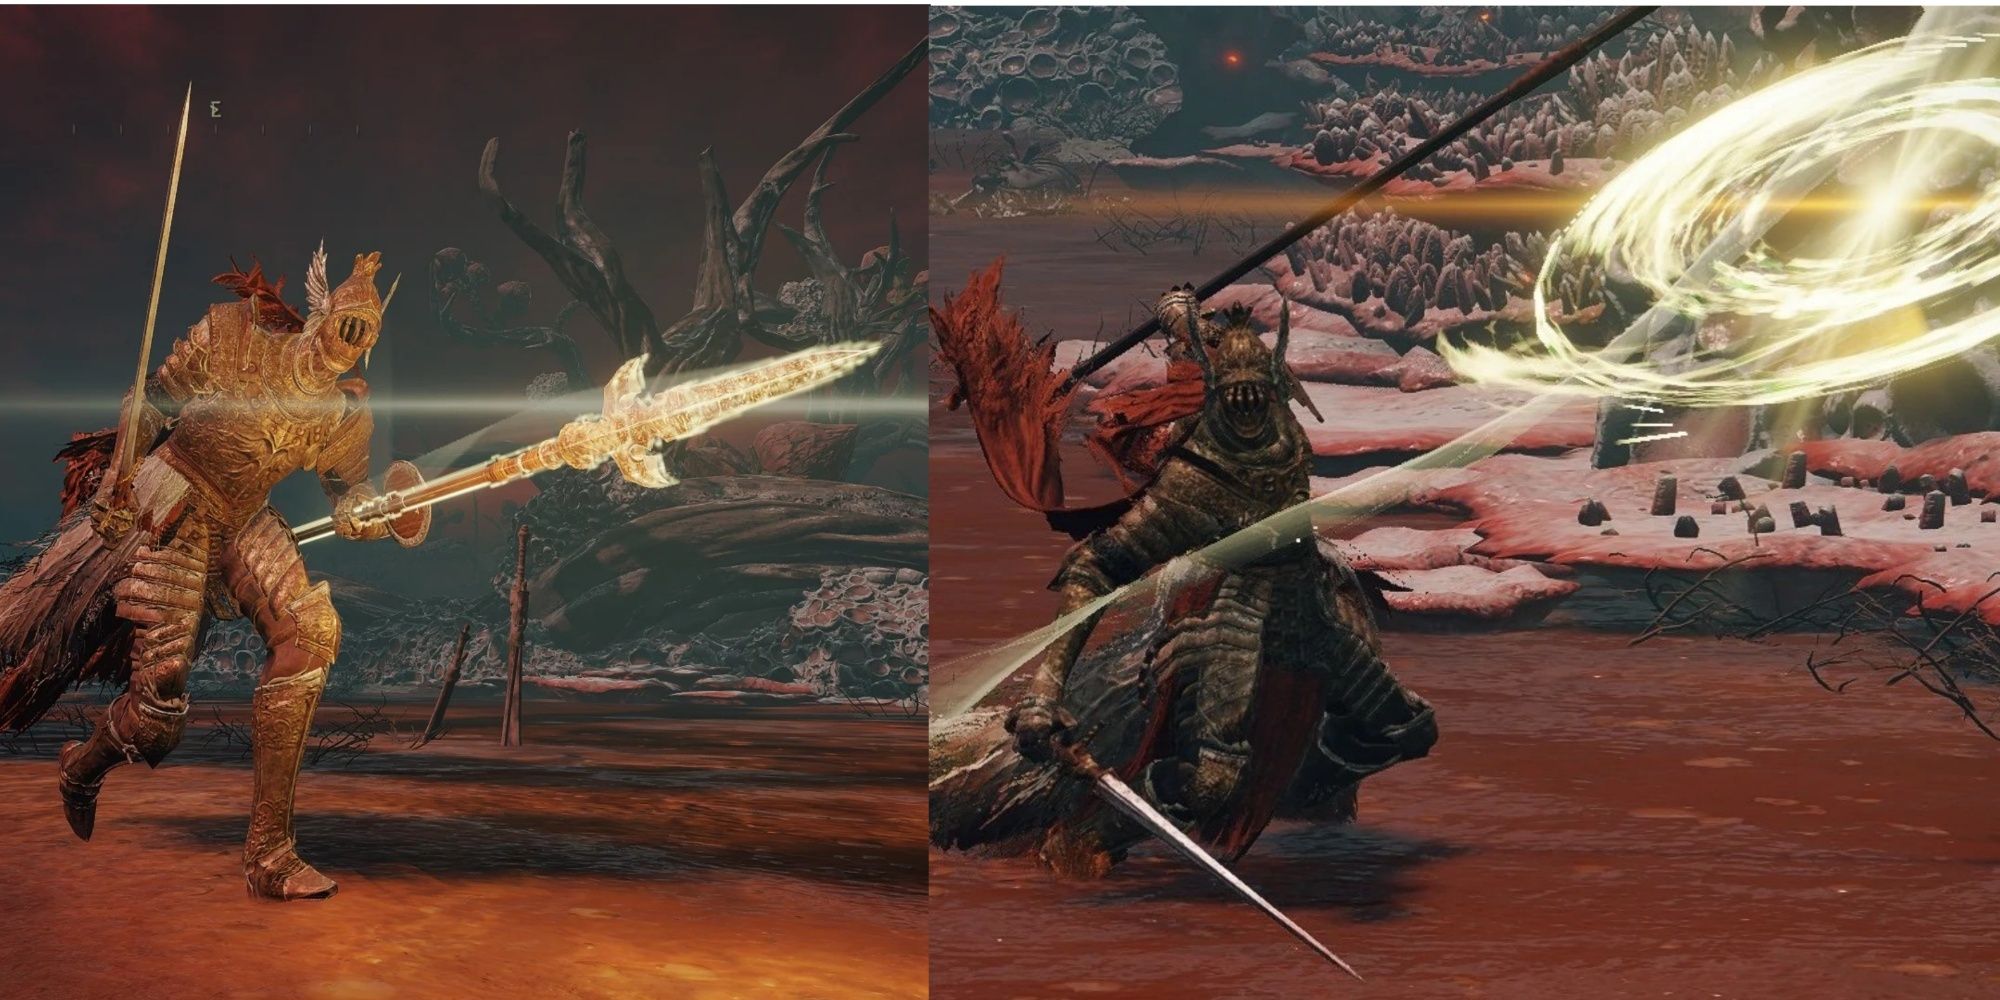 Cleanrot Spear and Halo Scythe wielded by Lesser Cleanrot Knights in Elden Ring